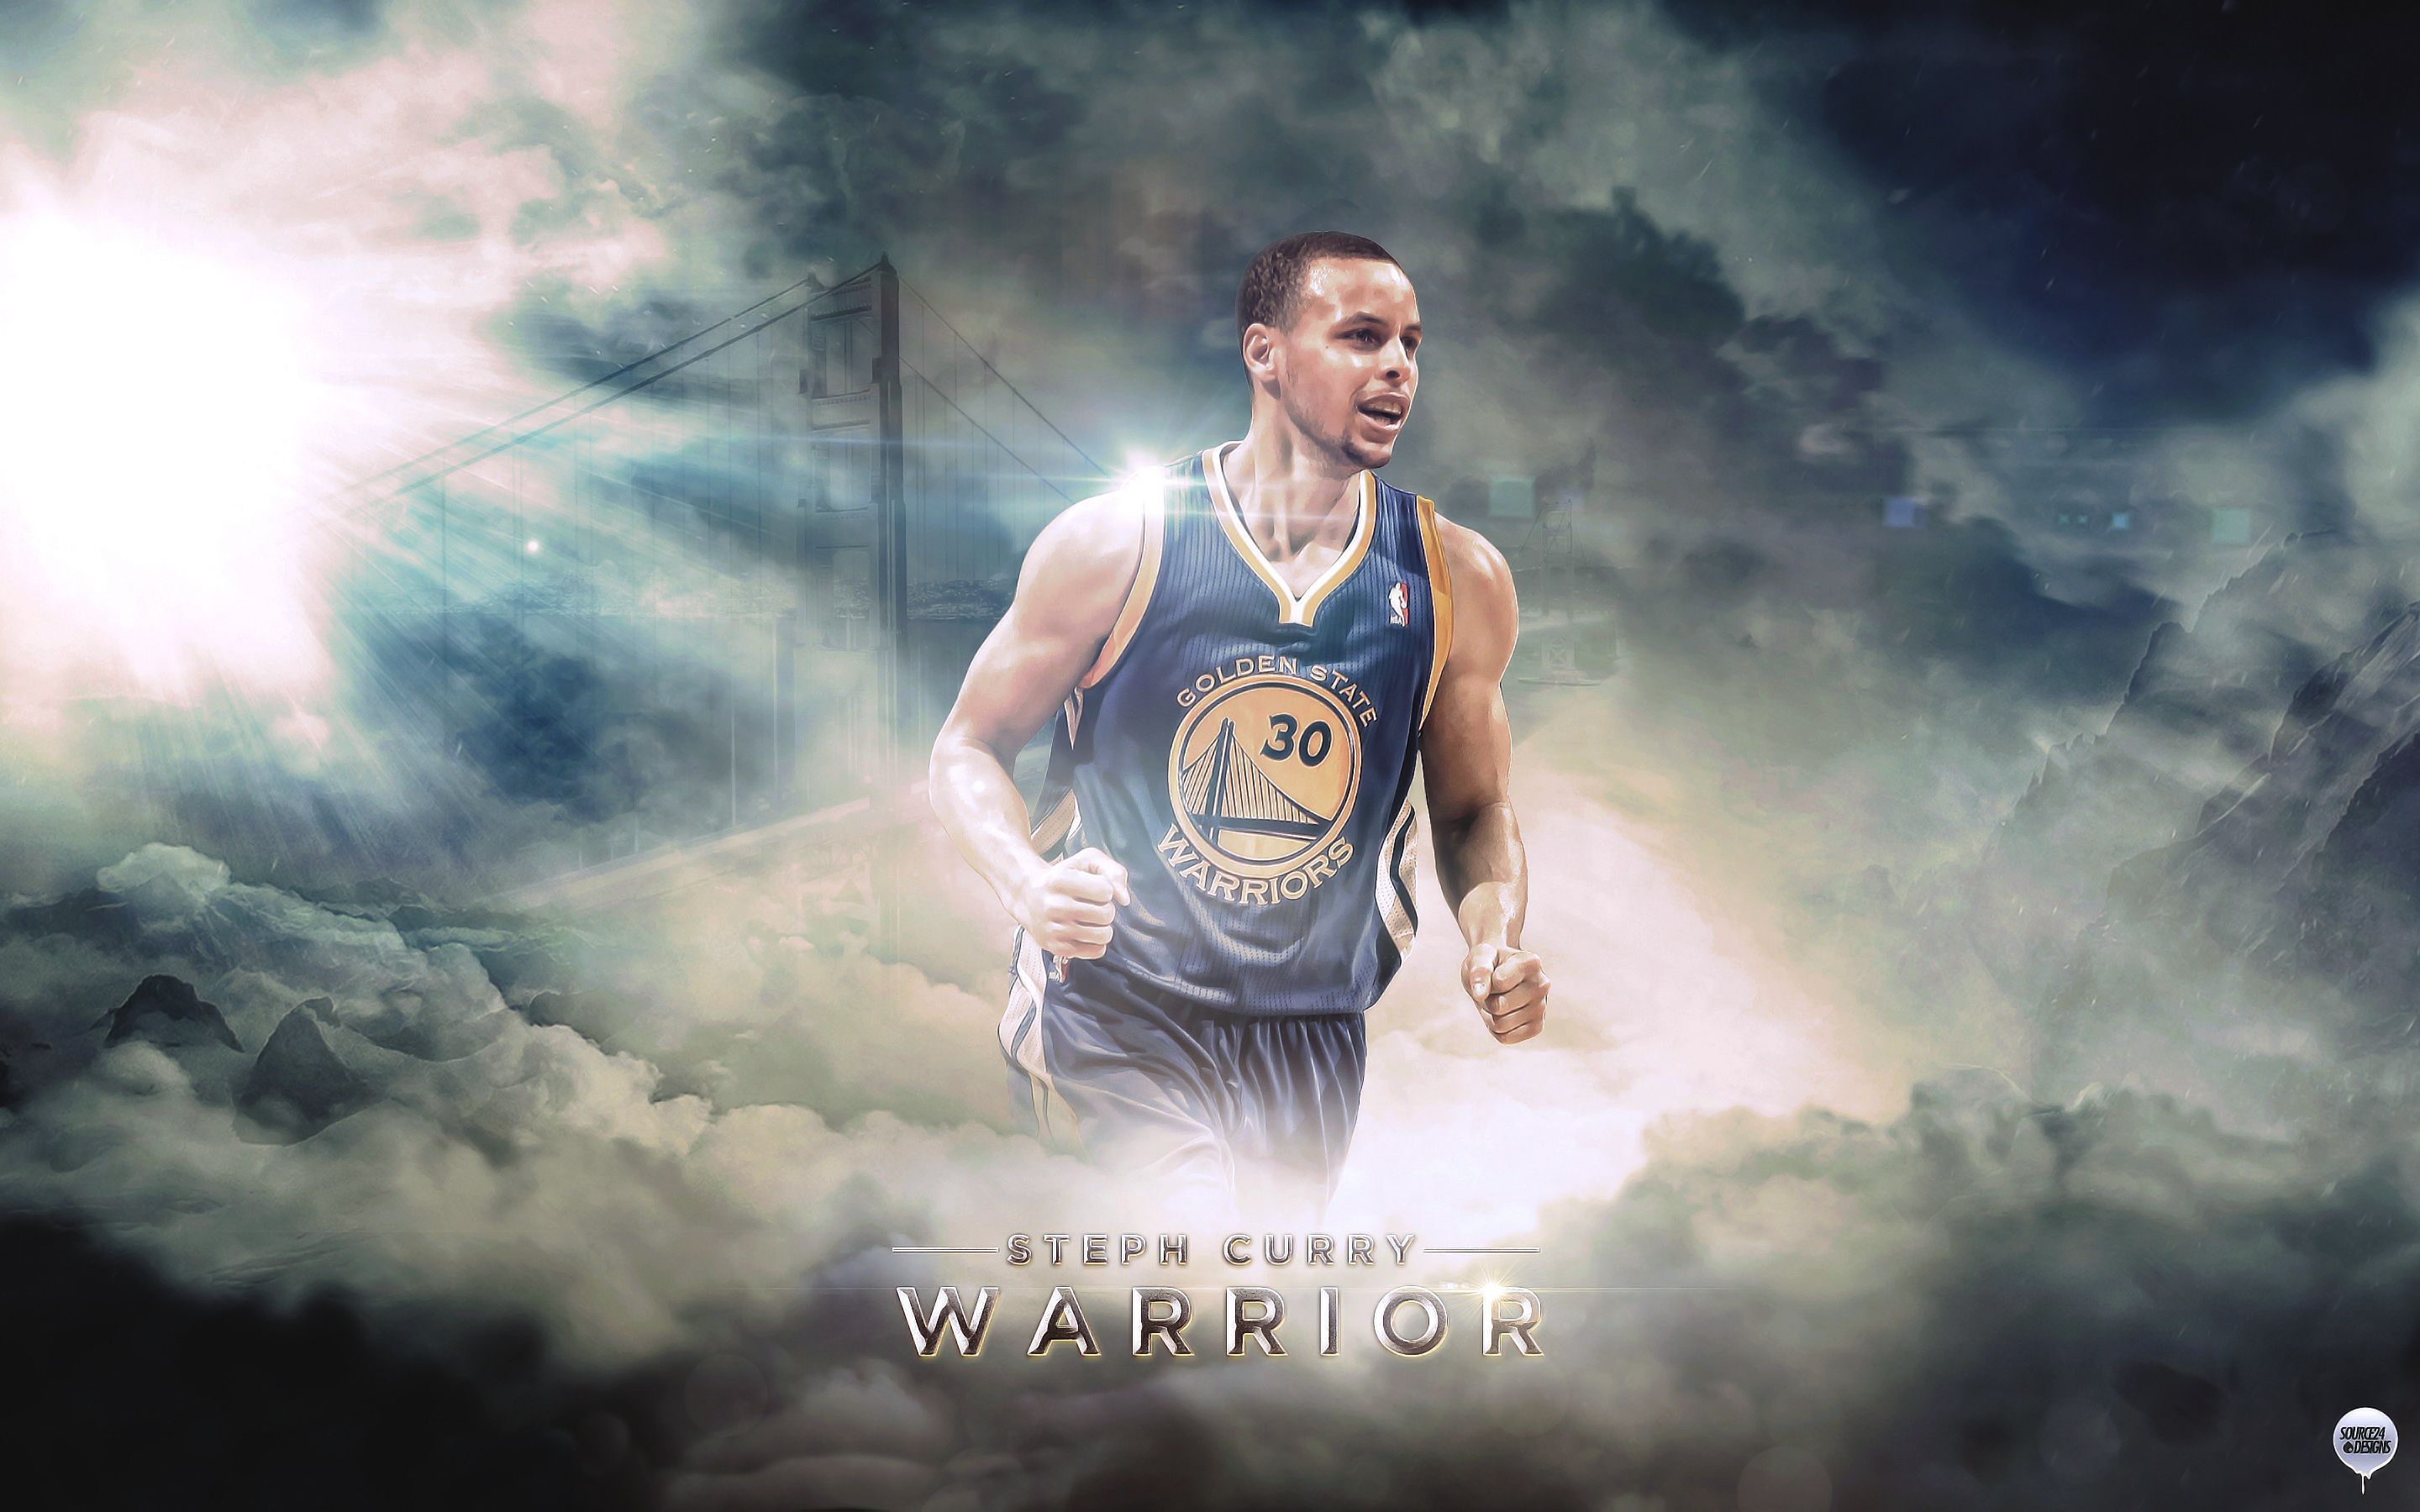 Stephen Curry wallpaper free download Wallpapers, Backgrounds